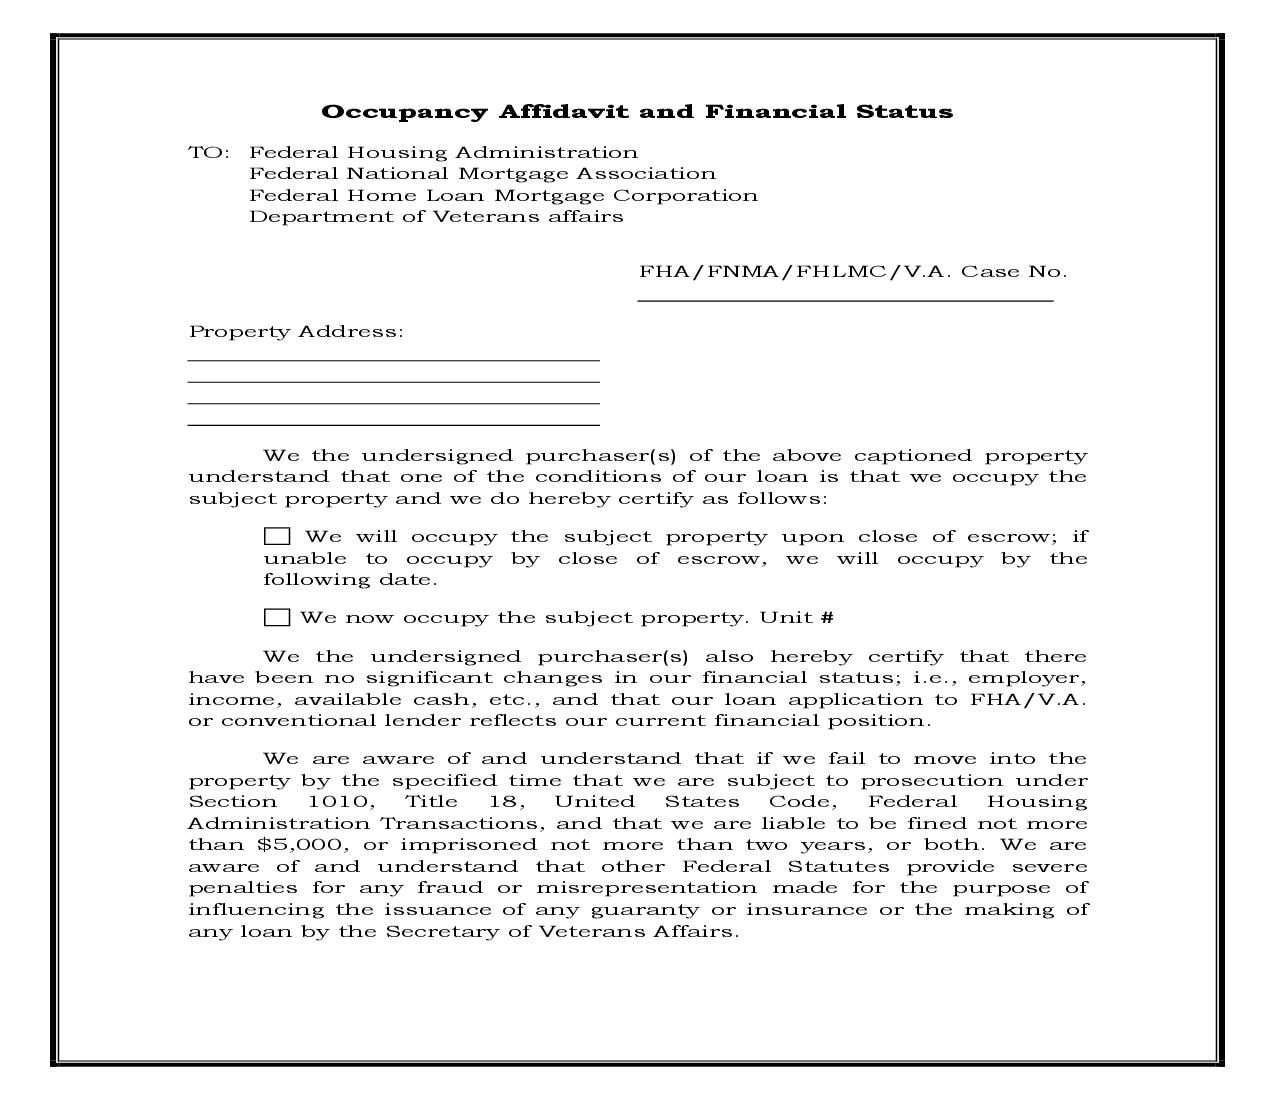 Affidavit Of Occupancy And Financial Status Legal Forms Financial Legal